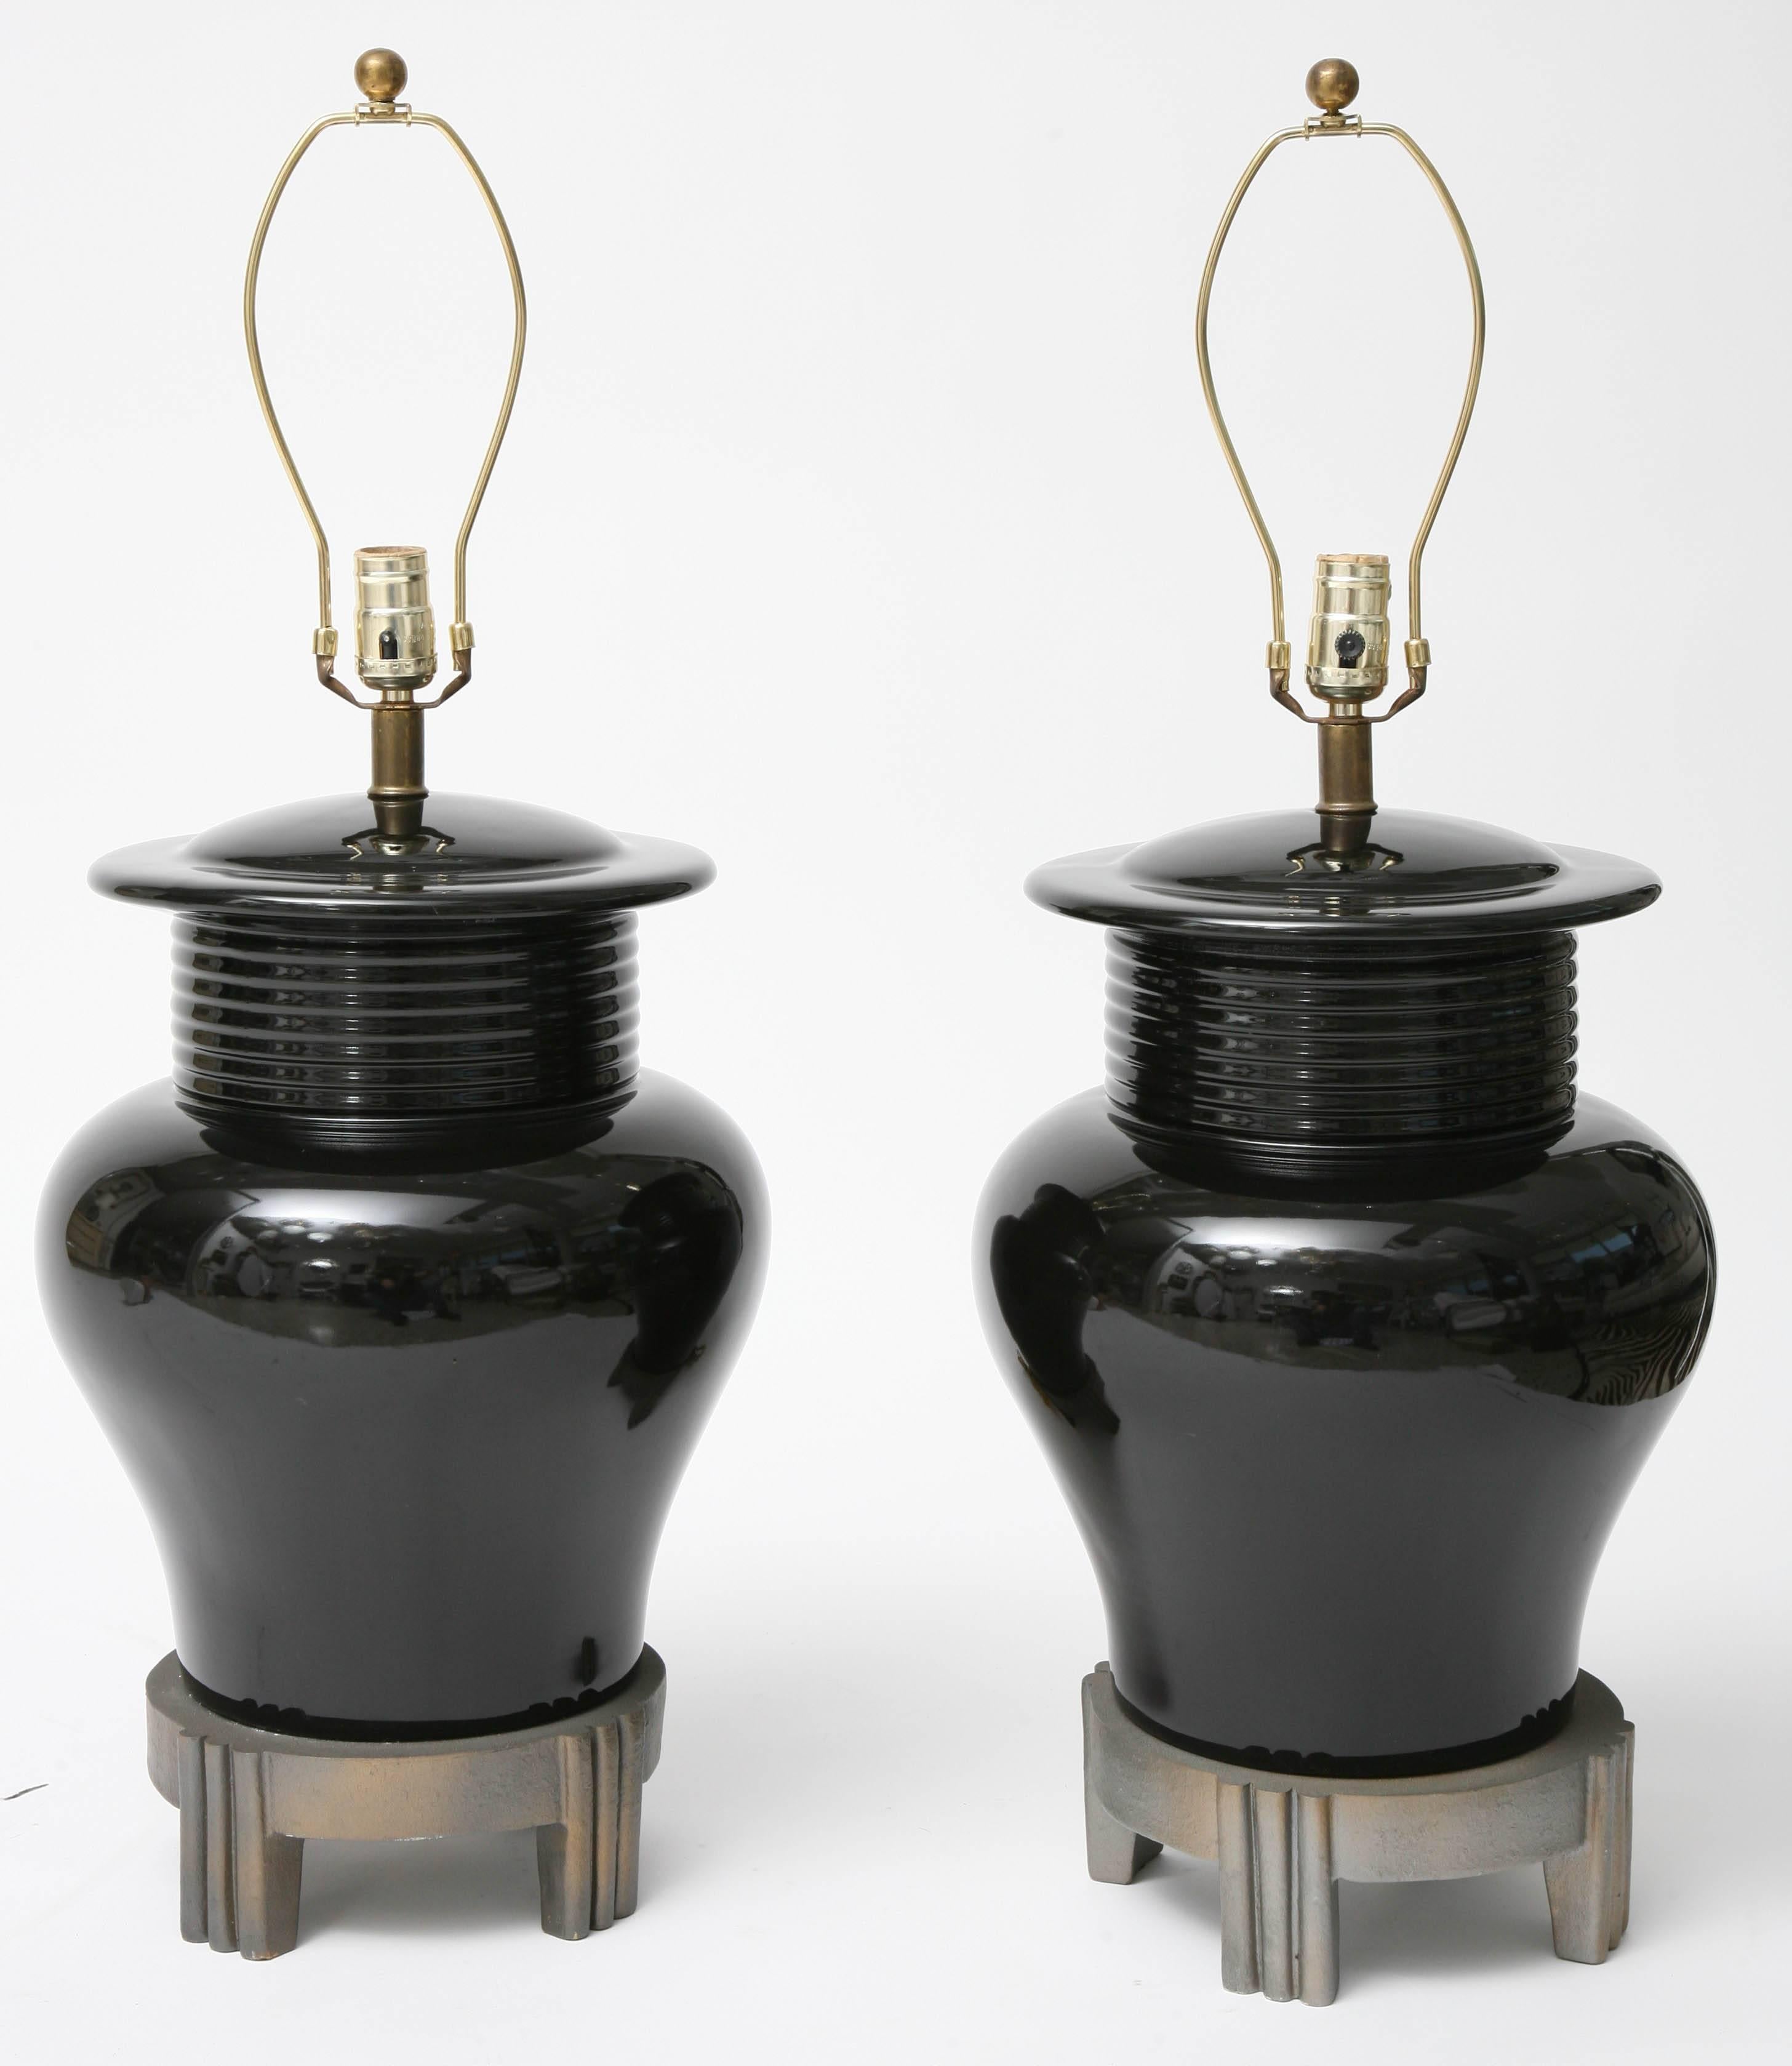 This handsome pair of table lamps are in the Art Deco taste with Asian influence in their form and size. The vase form is of ceramic in a high-gloss black color and the bases are a composition with a grey-tone finish and color.

Note: The lamps